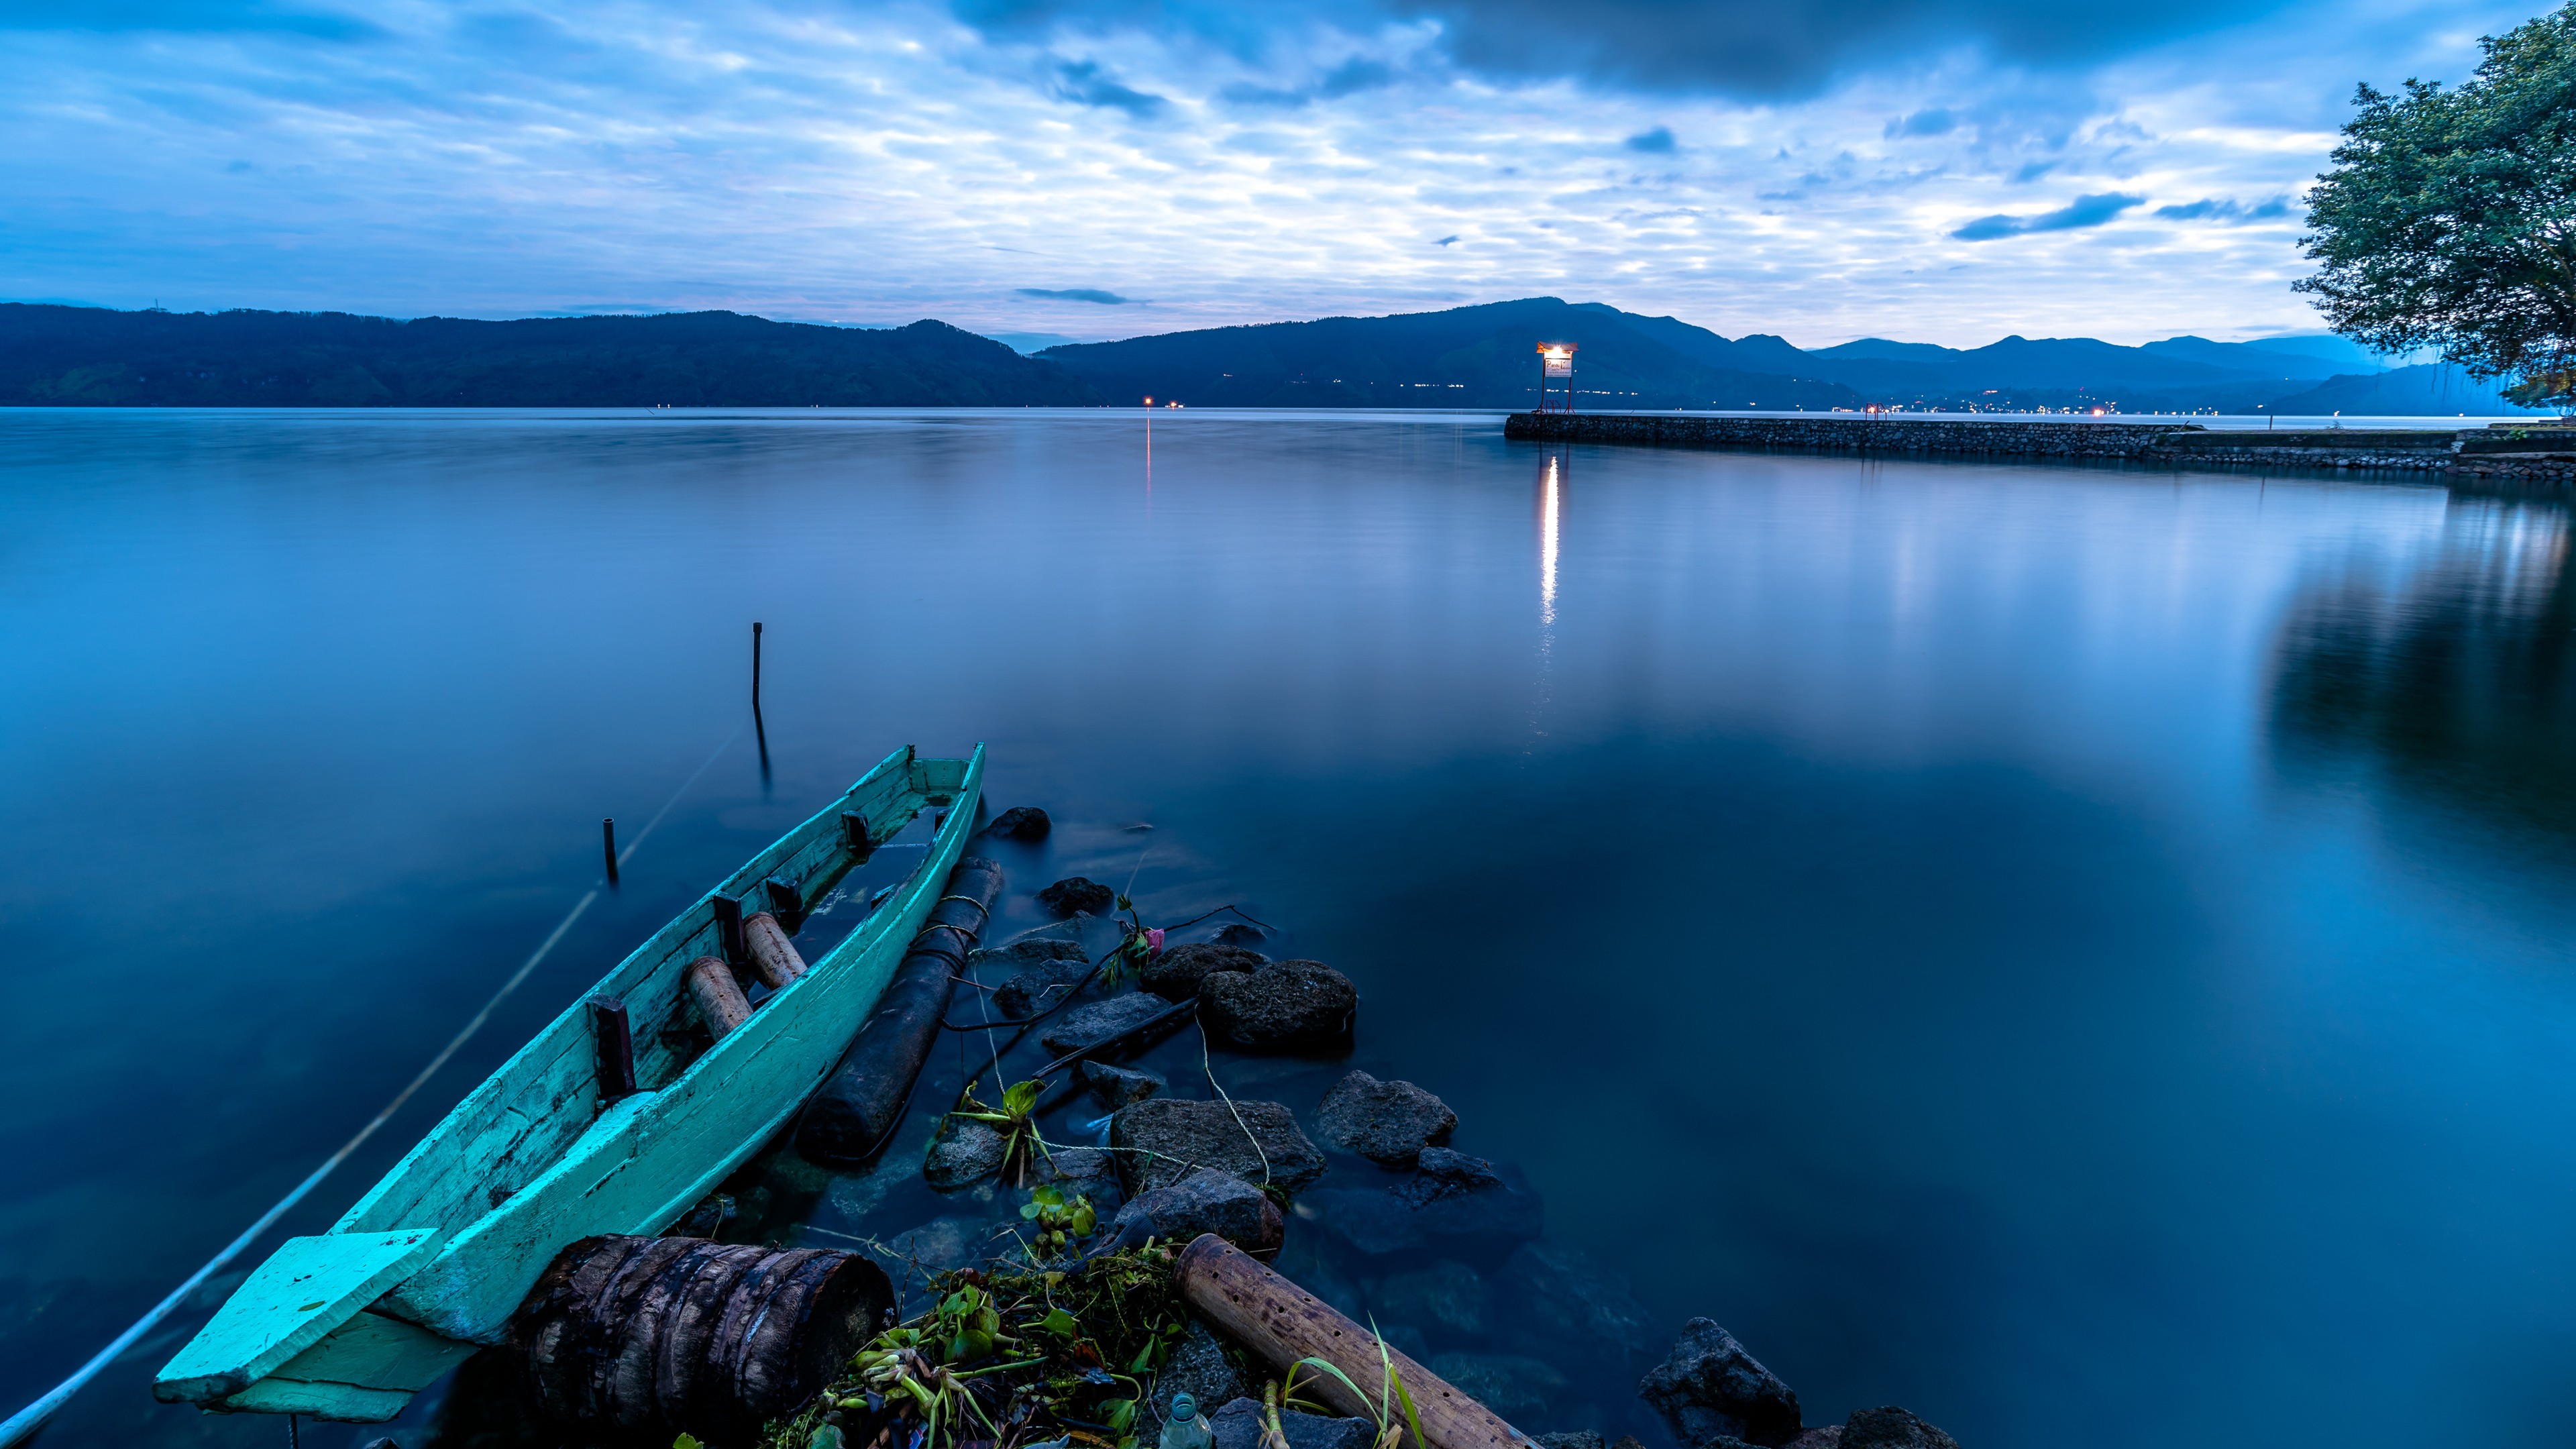 General 3840x2160 lake nature Indonesia Asia landscape outdoors water calm waters